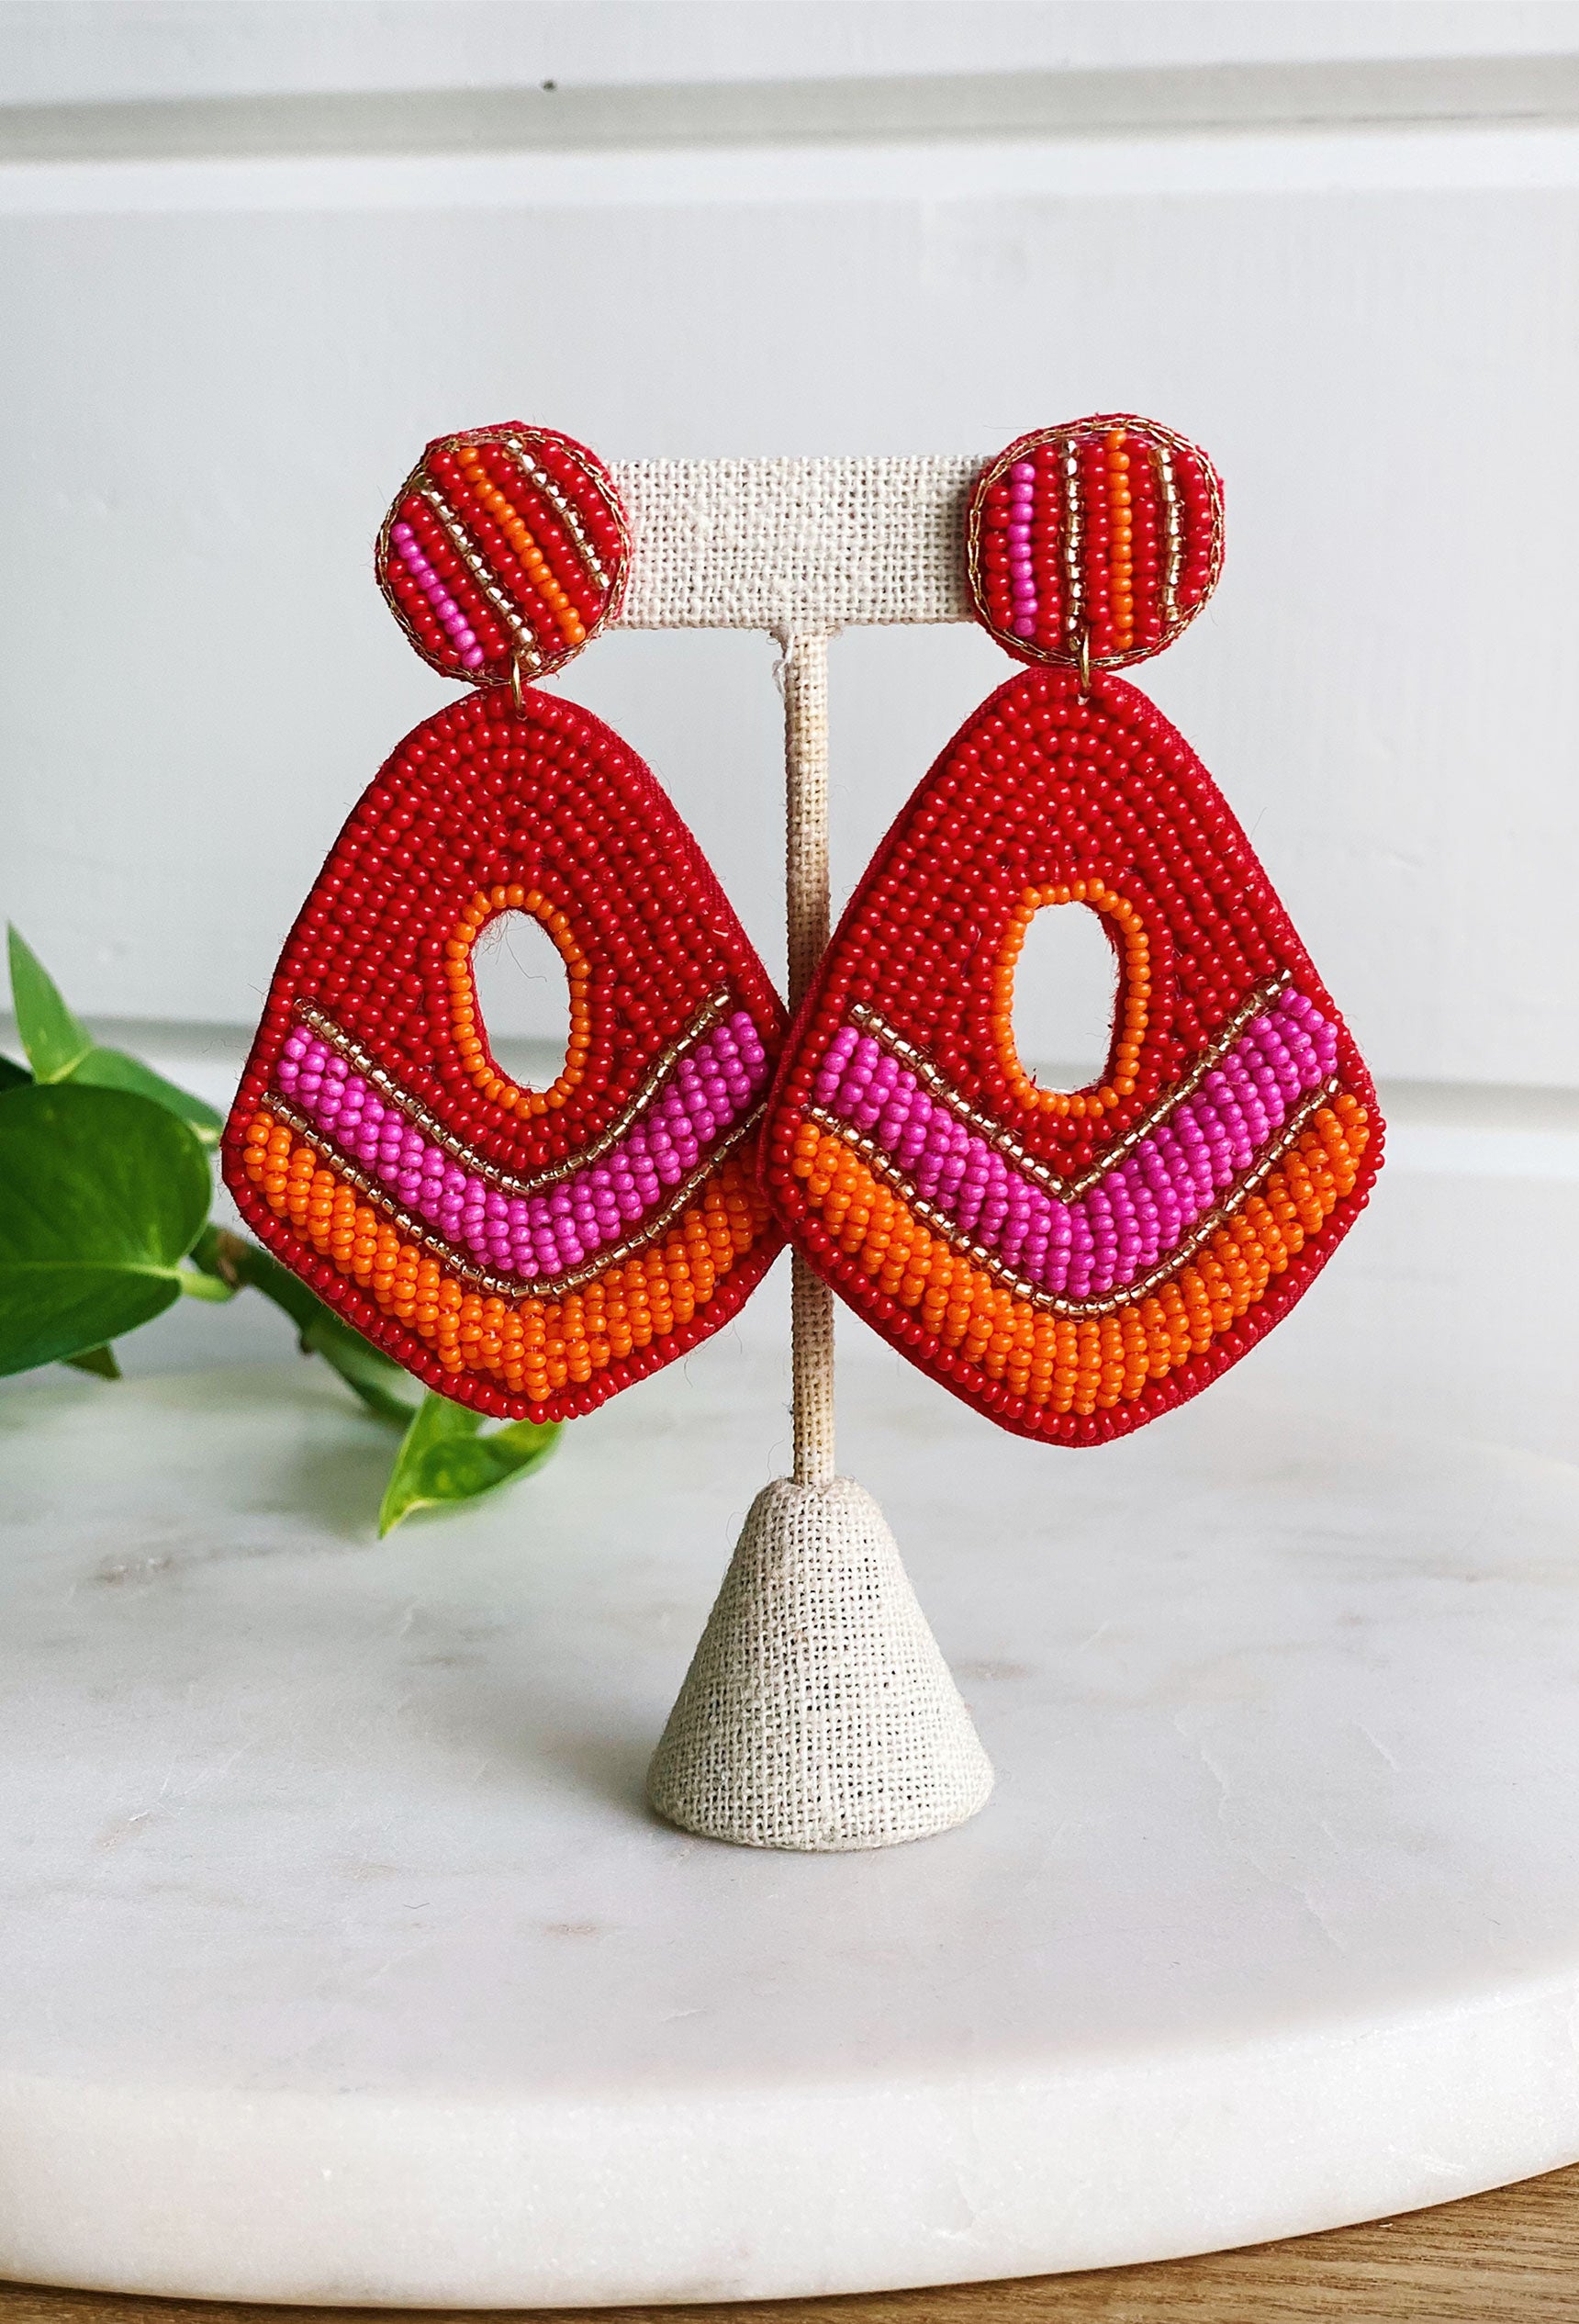 Bondi Beach Beaded Earrings, Teardrop shaped earring with a hole in the middle, pink, red, orange and gold beads, felt backing, post back